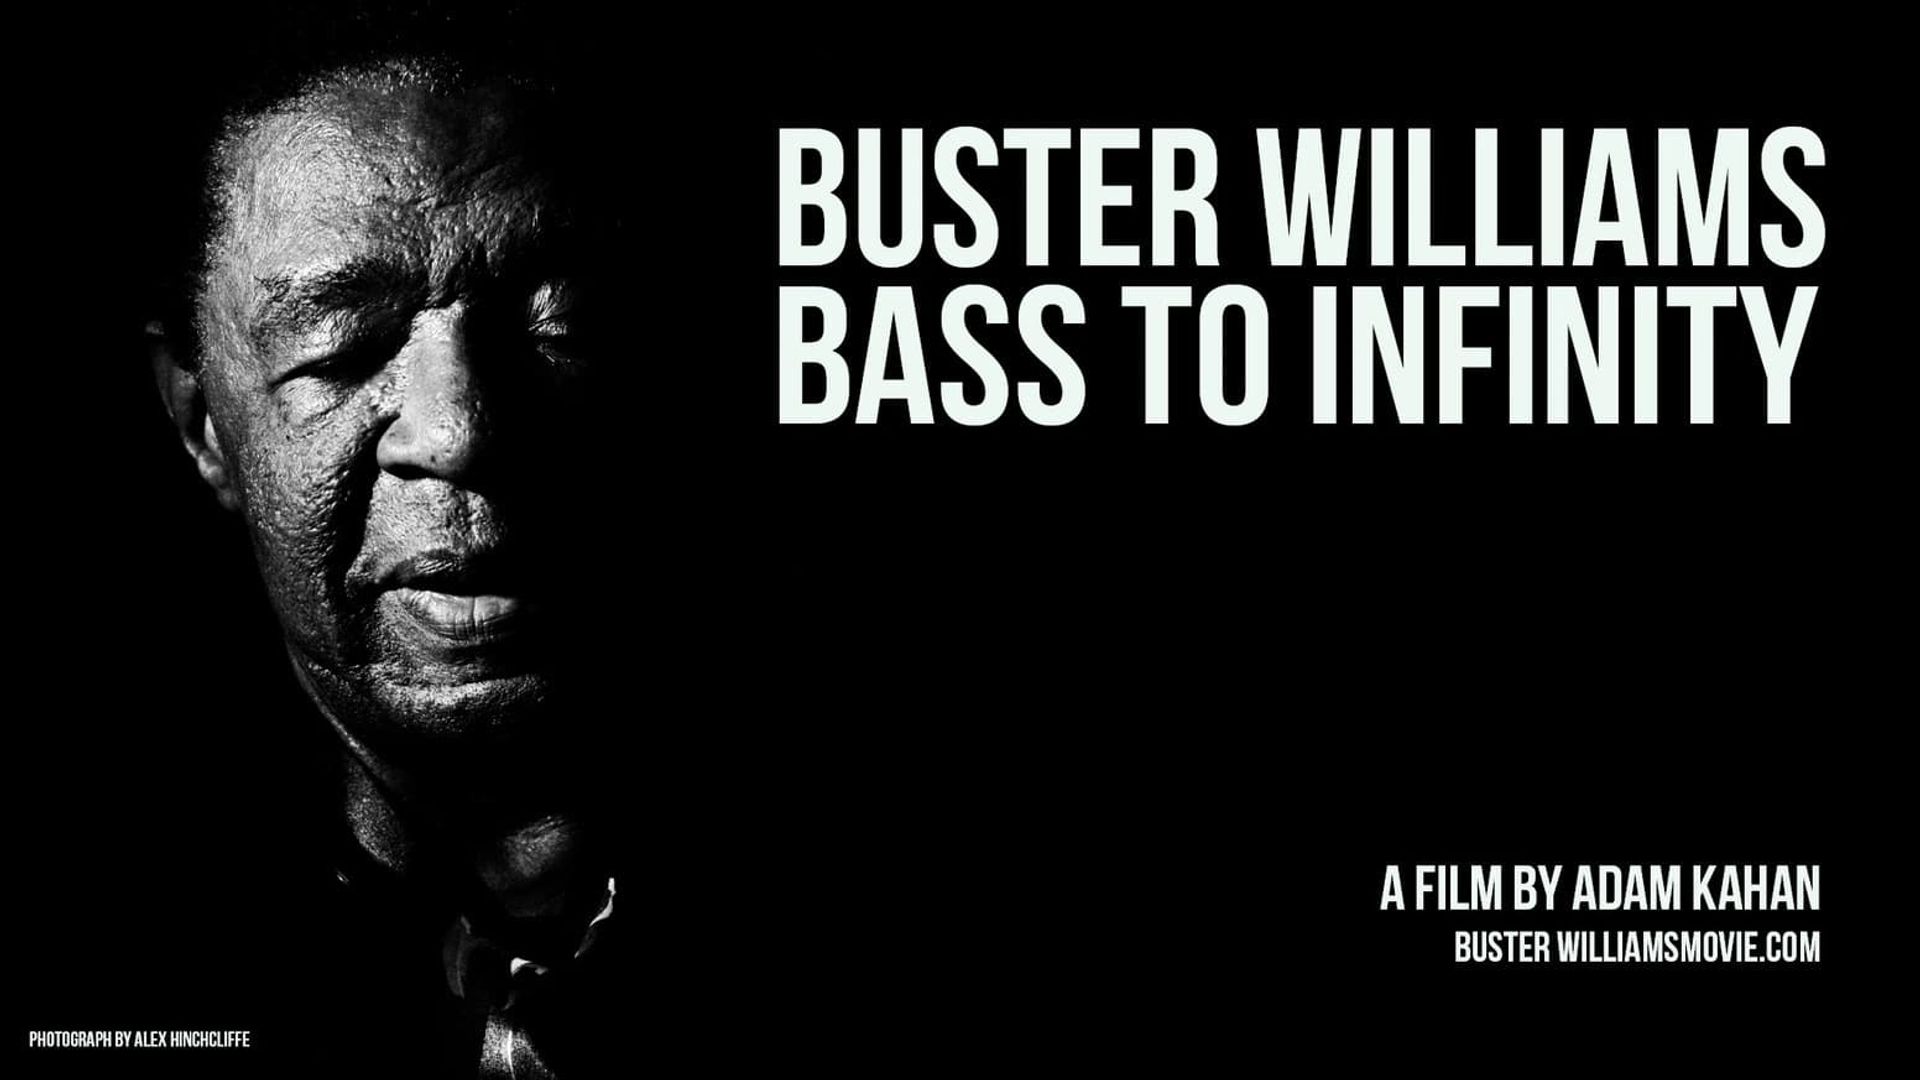 Buster Williams Bass to Infinity background